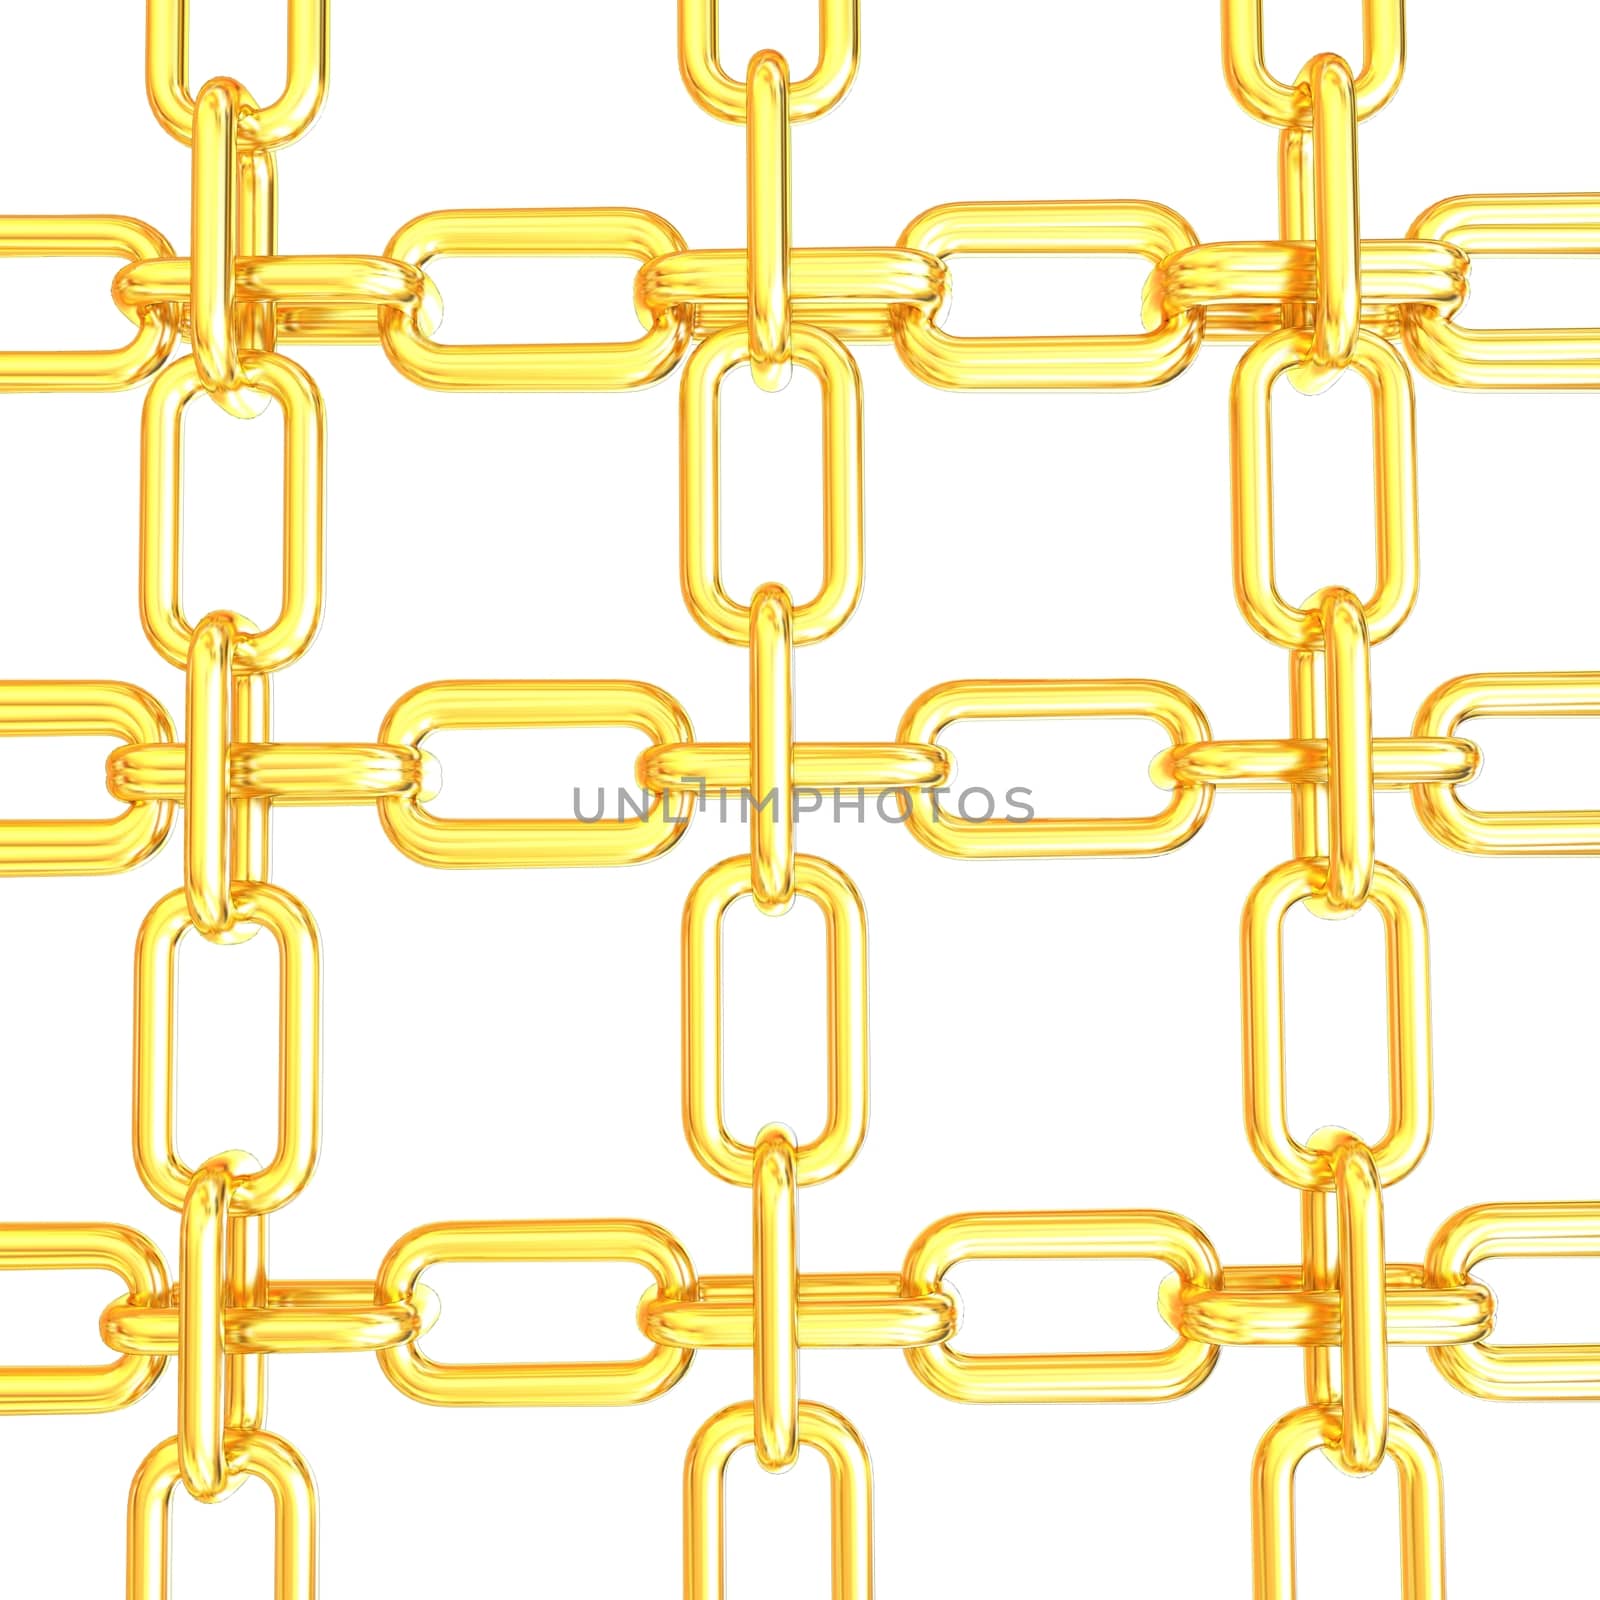 Gold chains isolated on white background